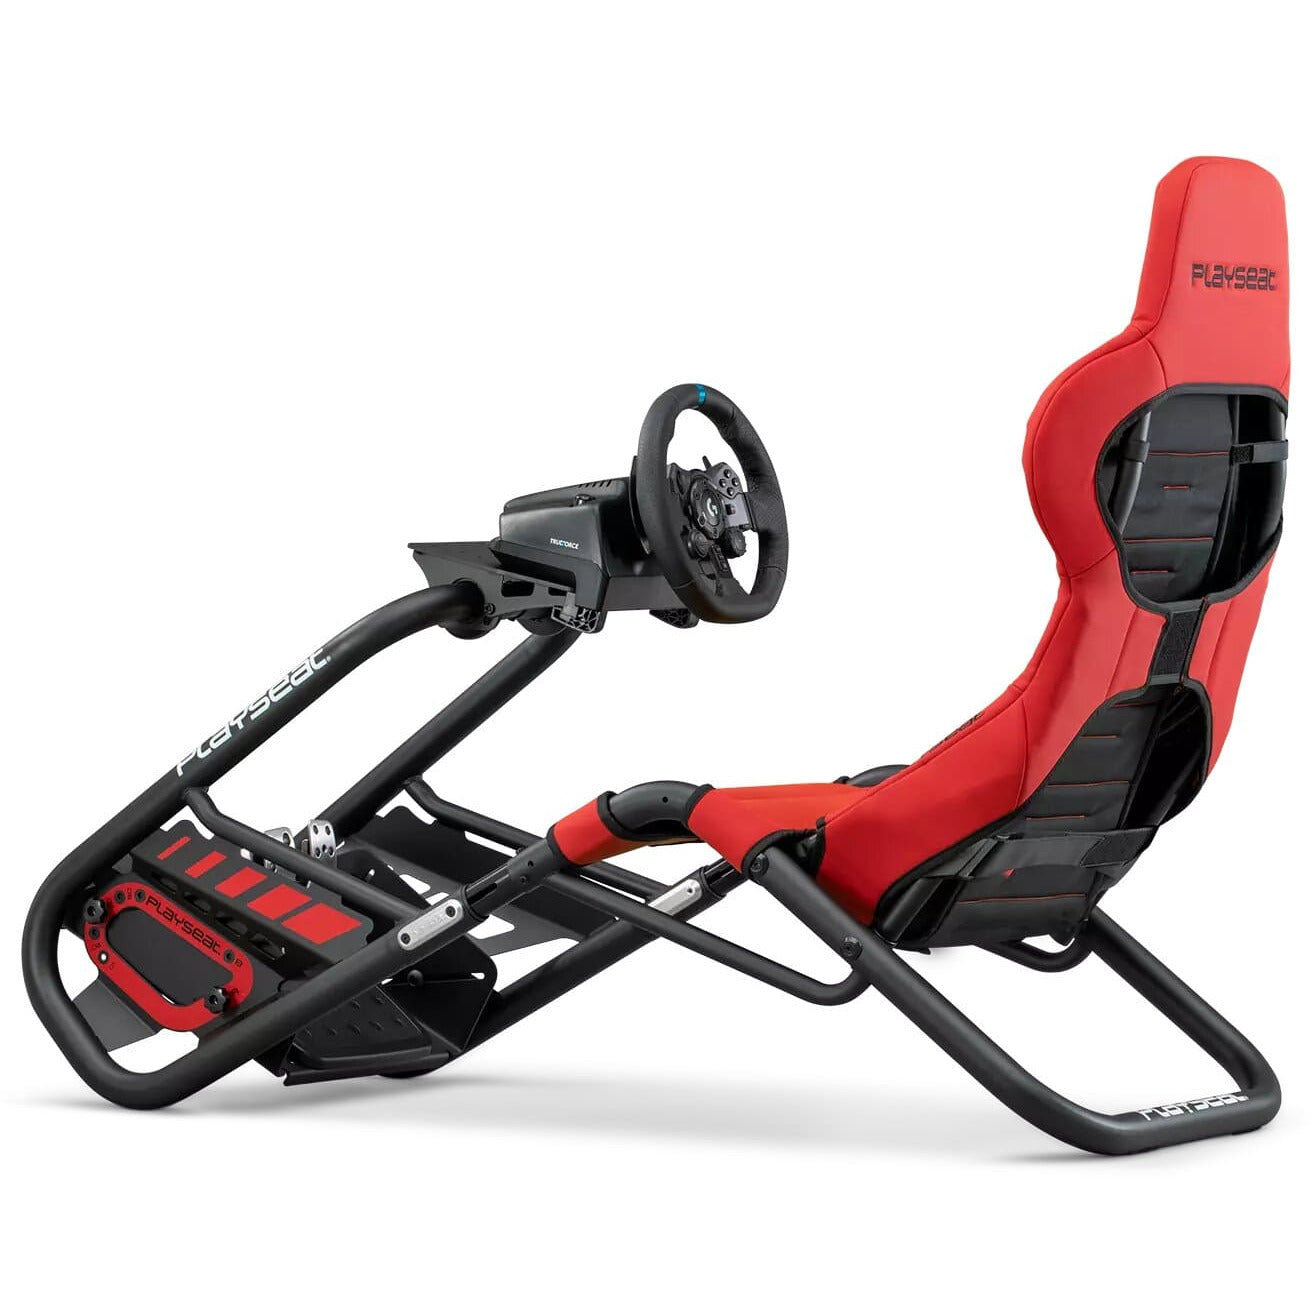 Playseat Trophy - Red